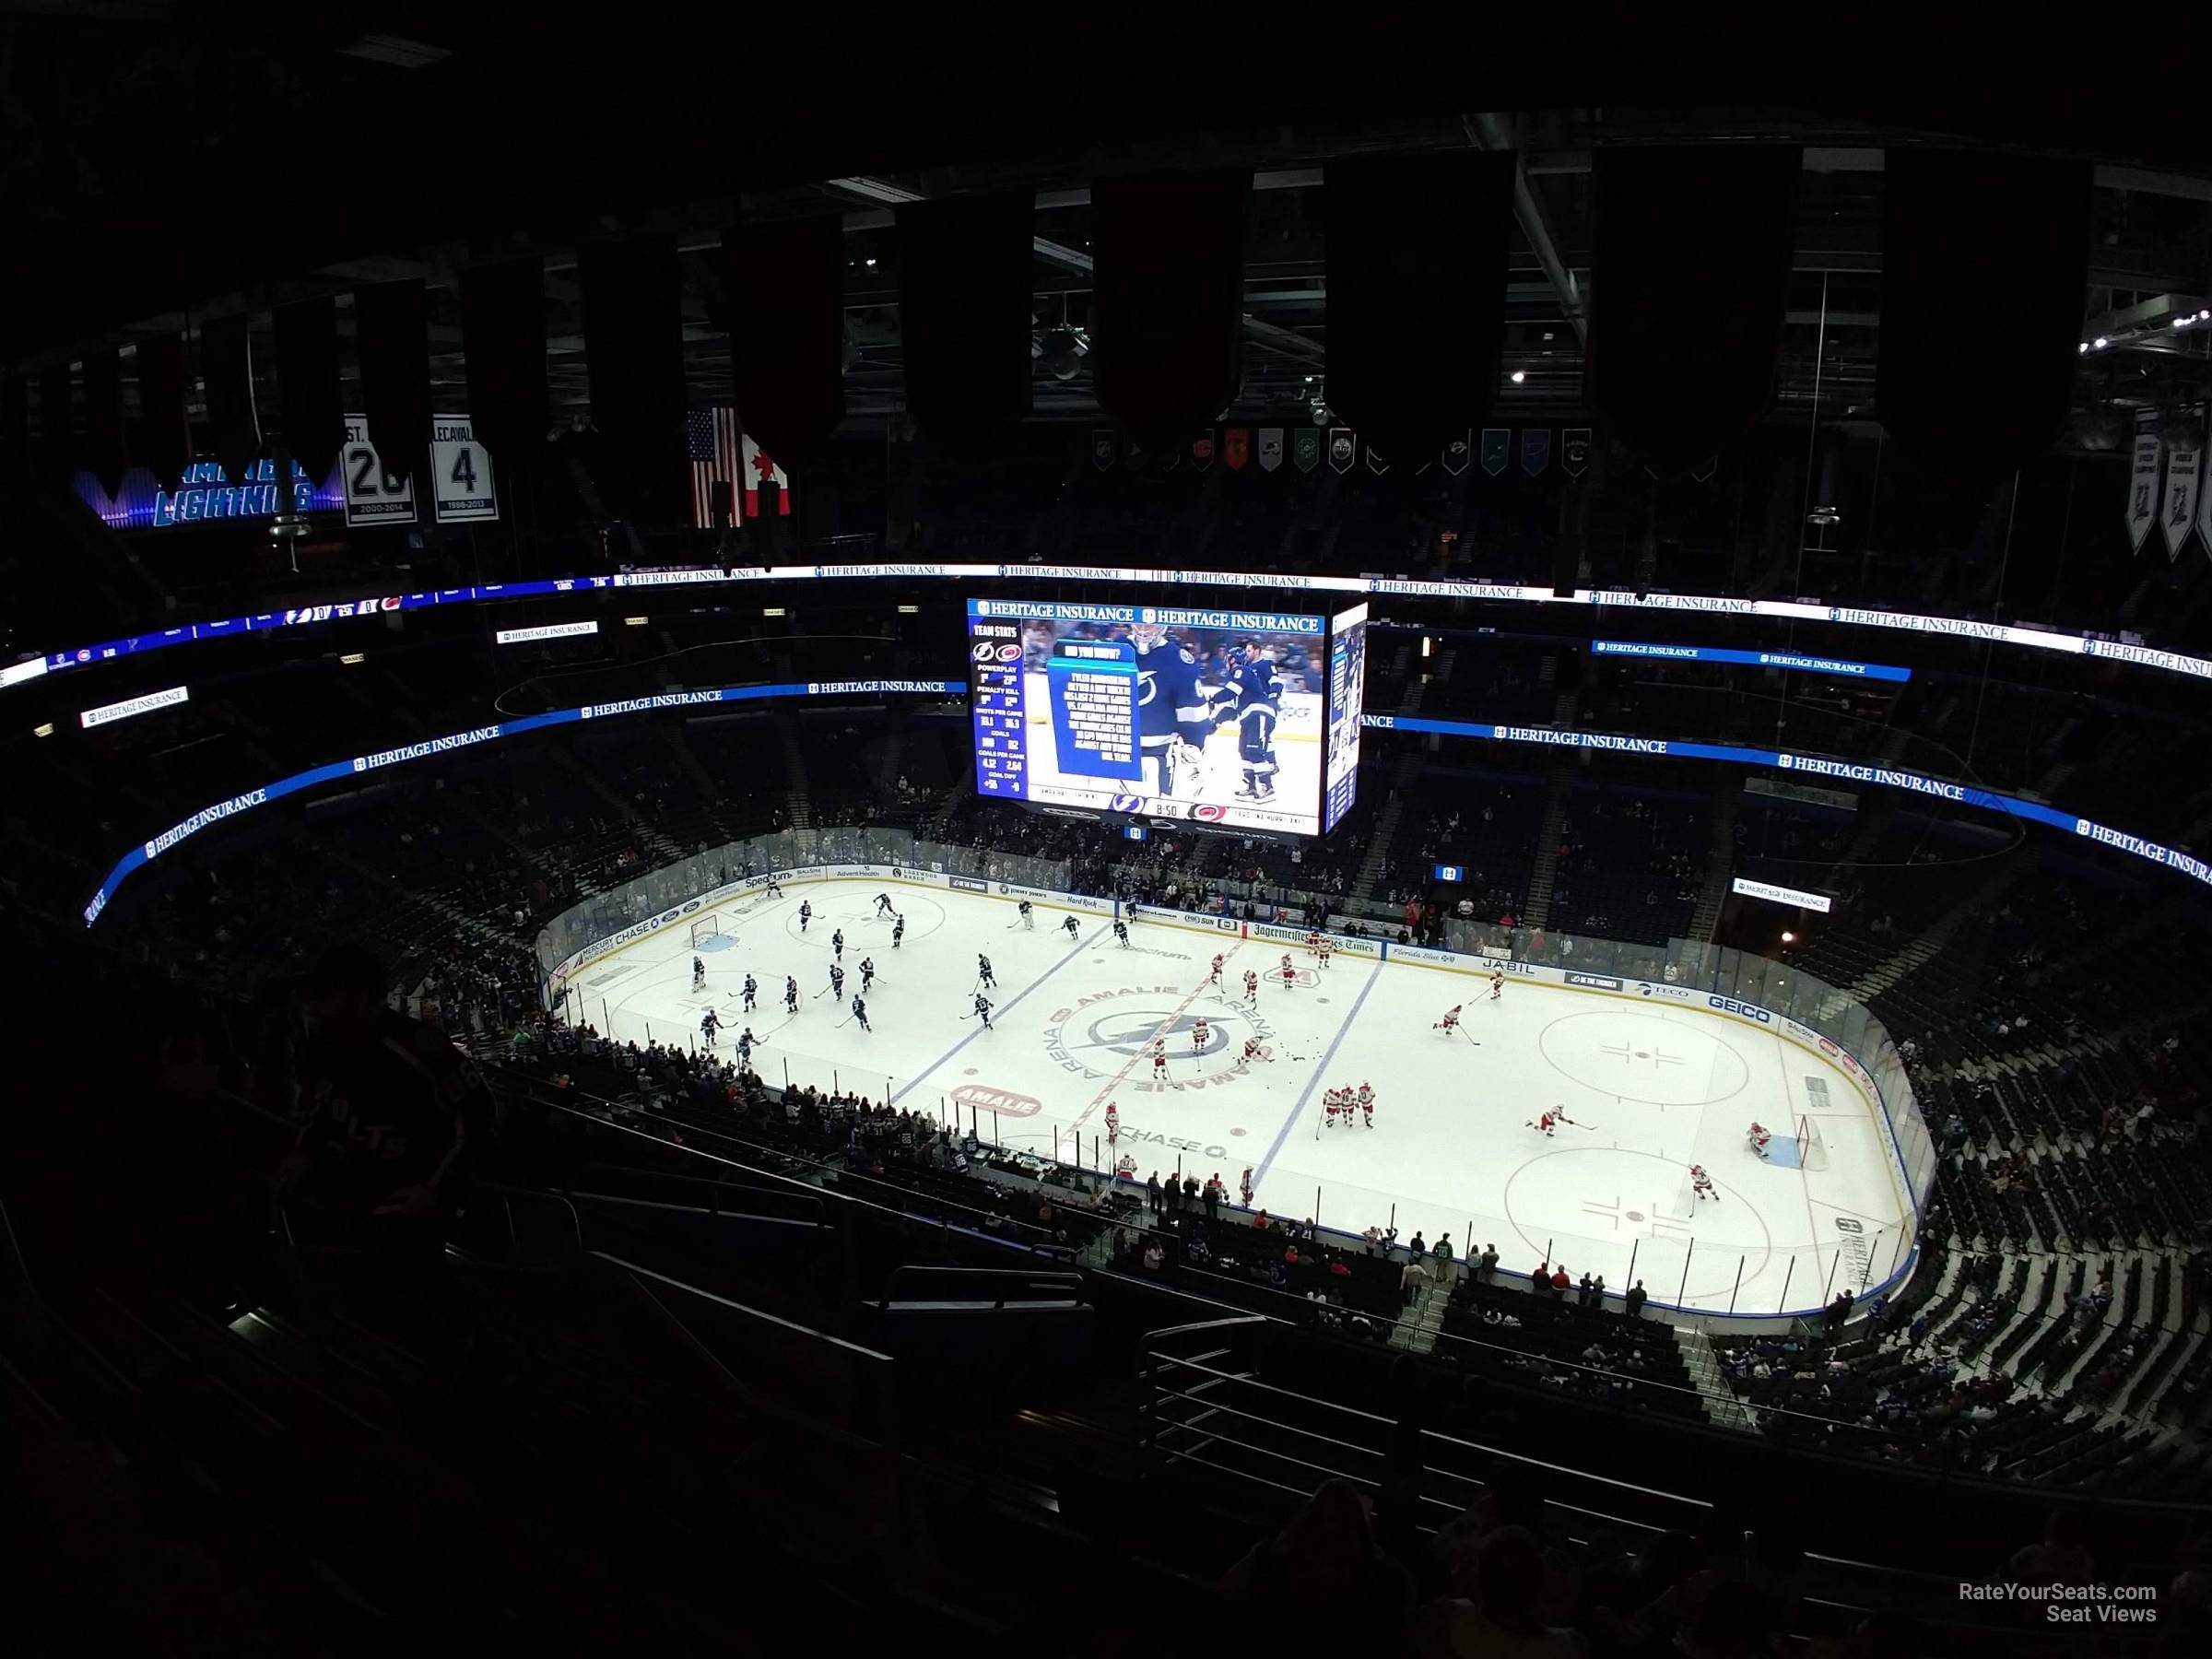 Section 317 Row K - very uncomfortble! - Review of Amalie Arena